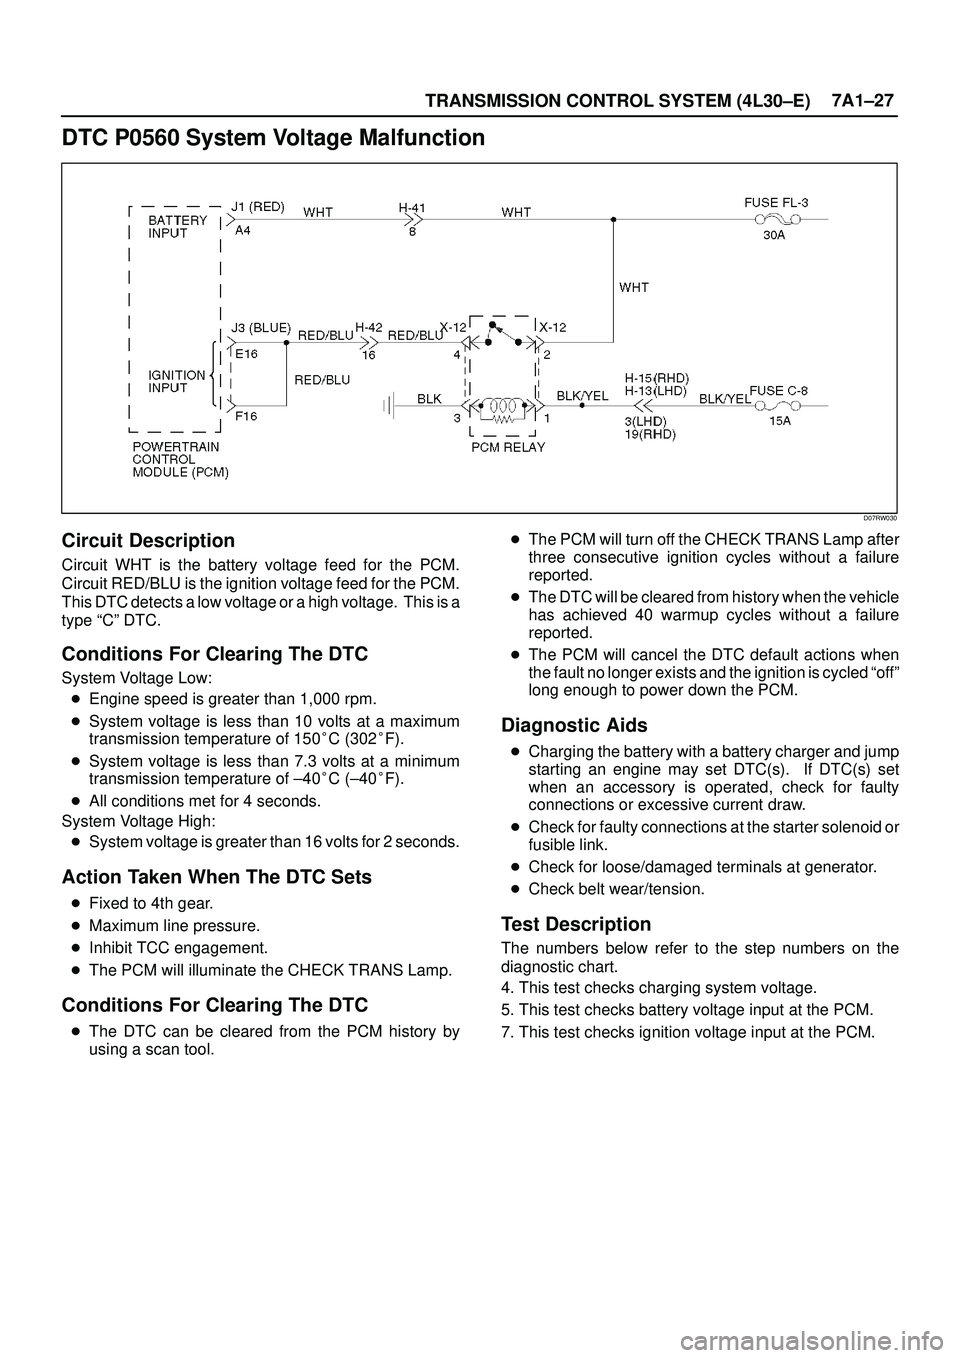 ISUZU TROOPER 1998  Service Repair Manual TRANSMISSION CONTROL SYSTEM (4L30±E)7A1±27
DTC P0560 System Voltage Malfunction
D07RW030
Circuit Description
Circuit WHT is the battery voltage feed for the PCM.
Circuit RED/BLU is the ignition volt